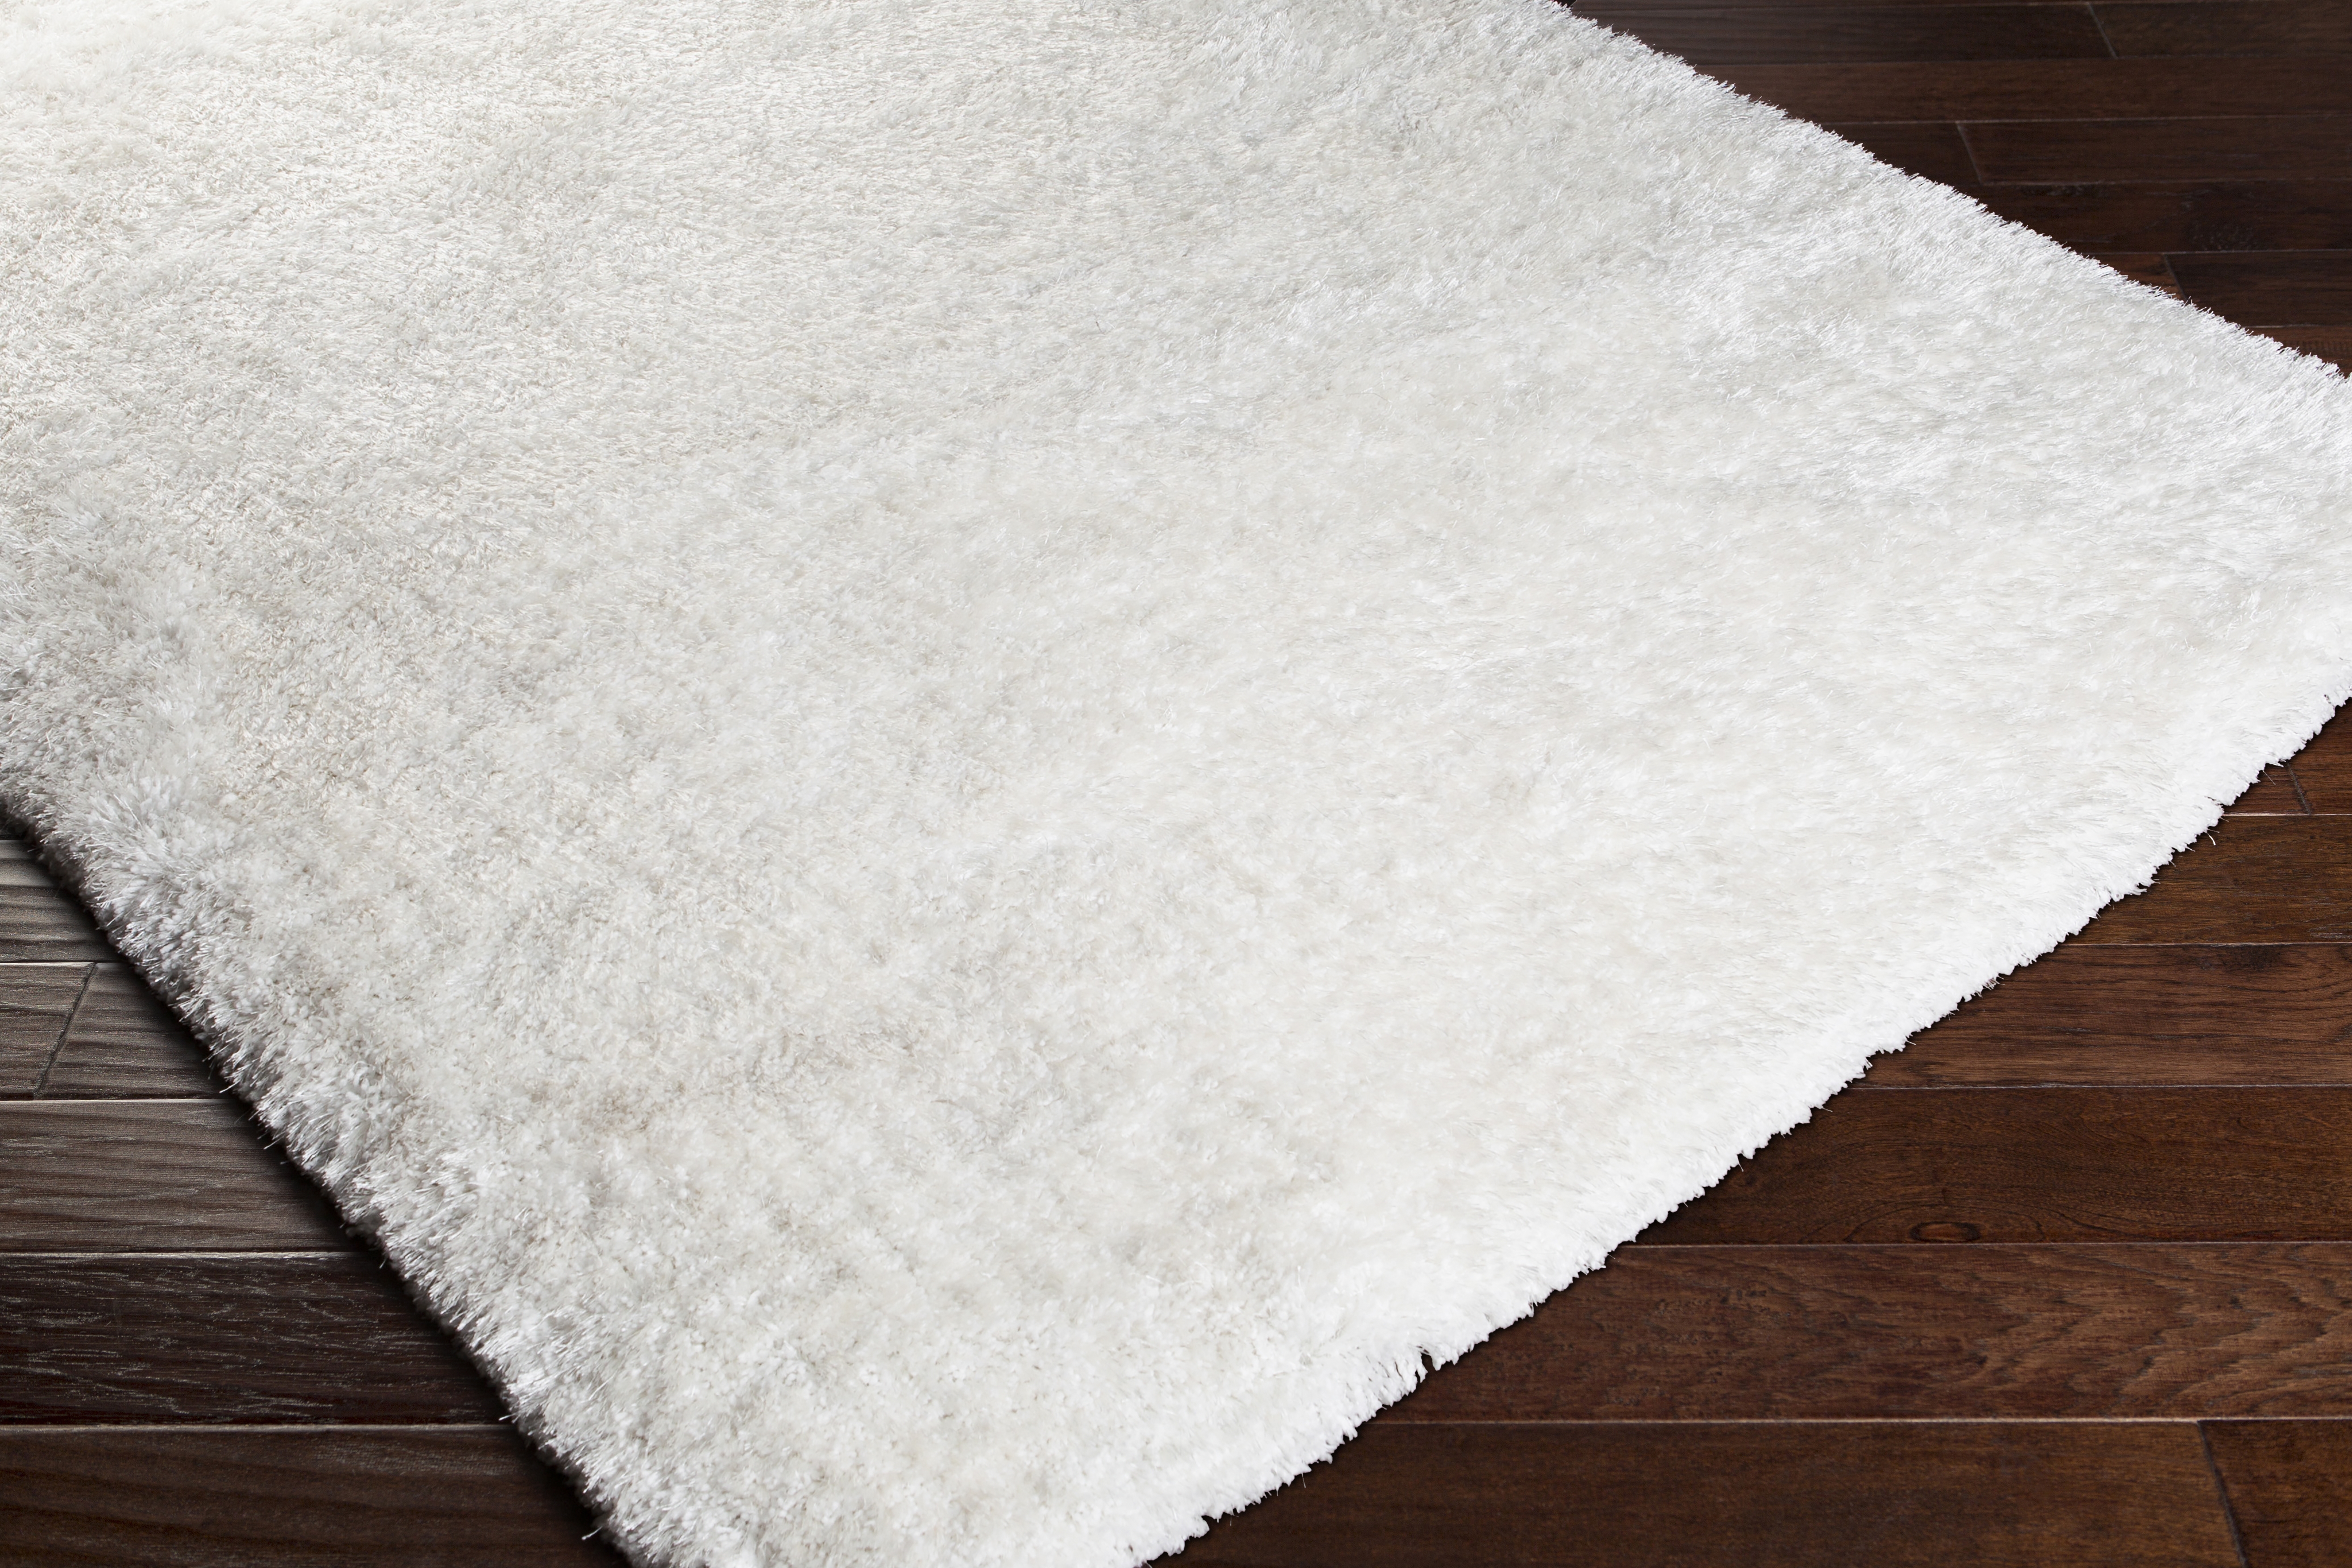 Grizzly Rug, 8' x 10' - Image 4